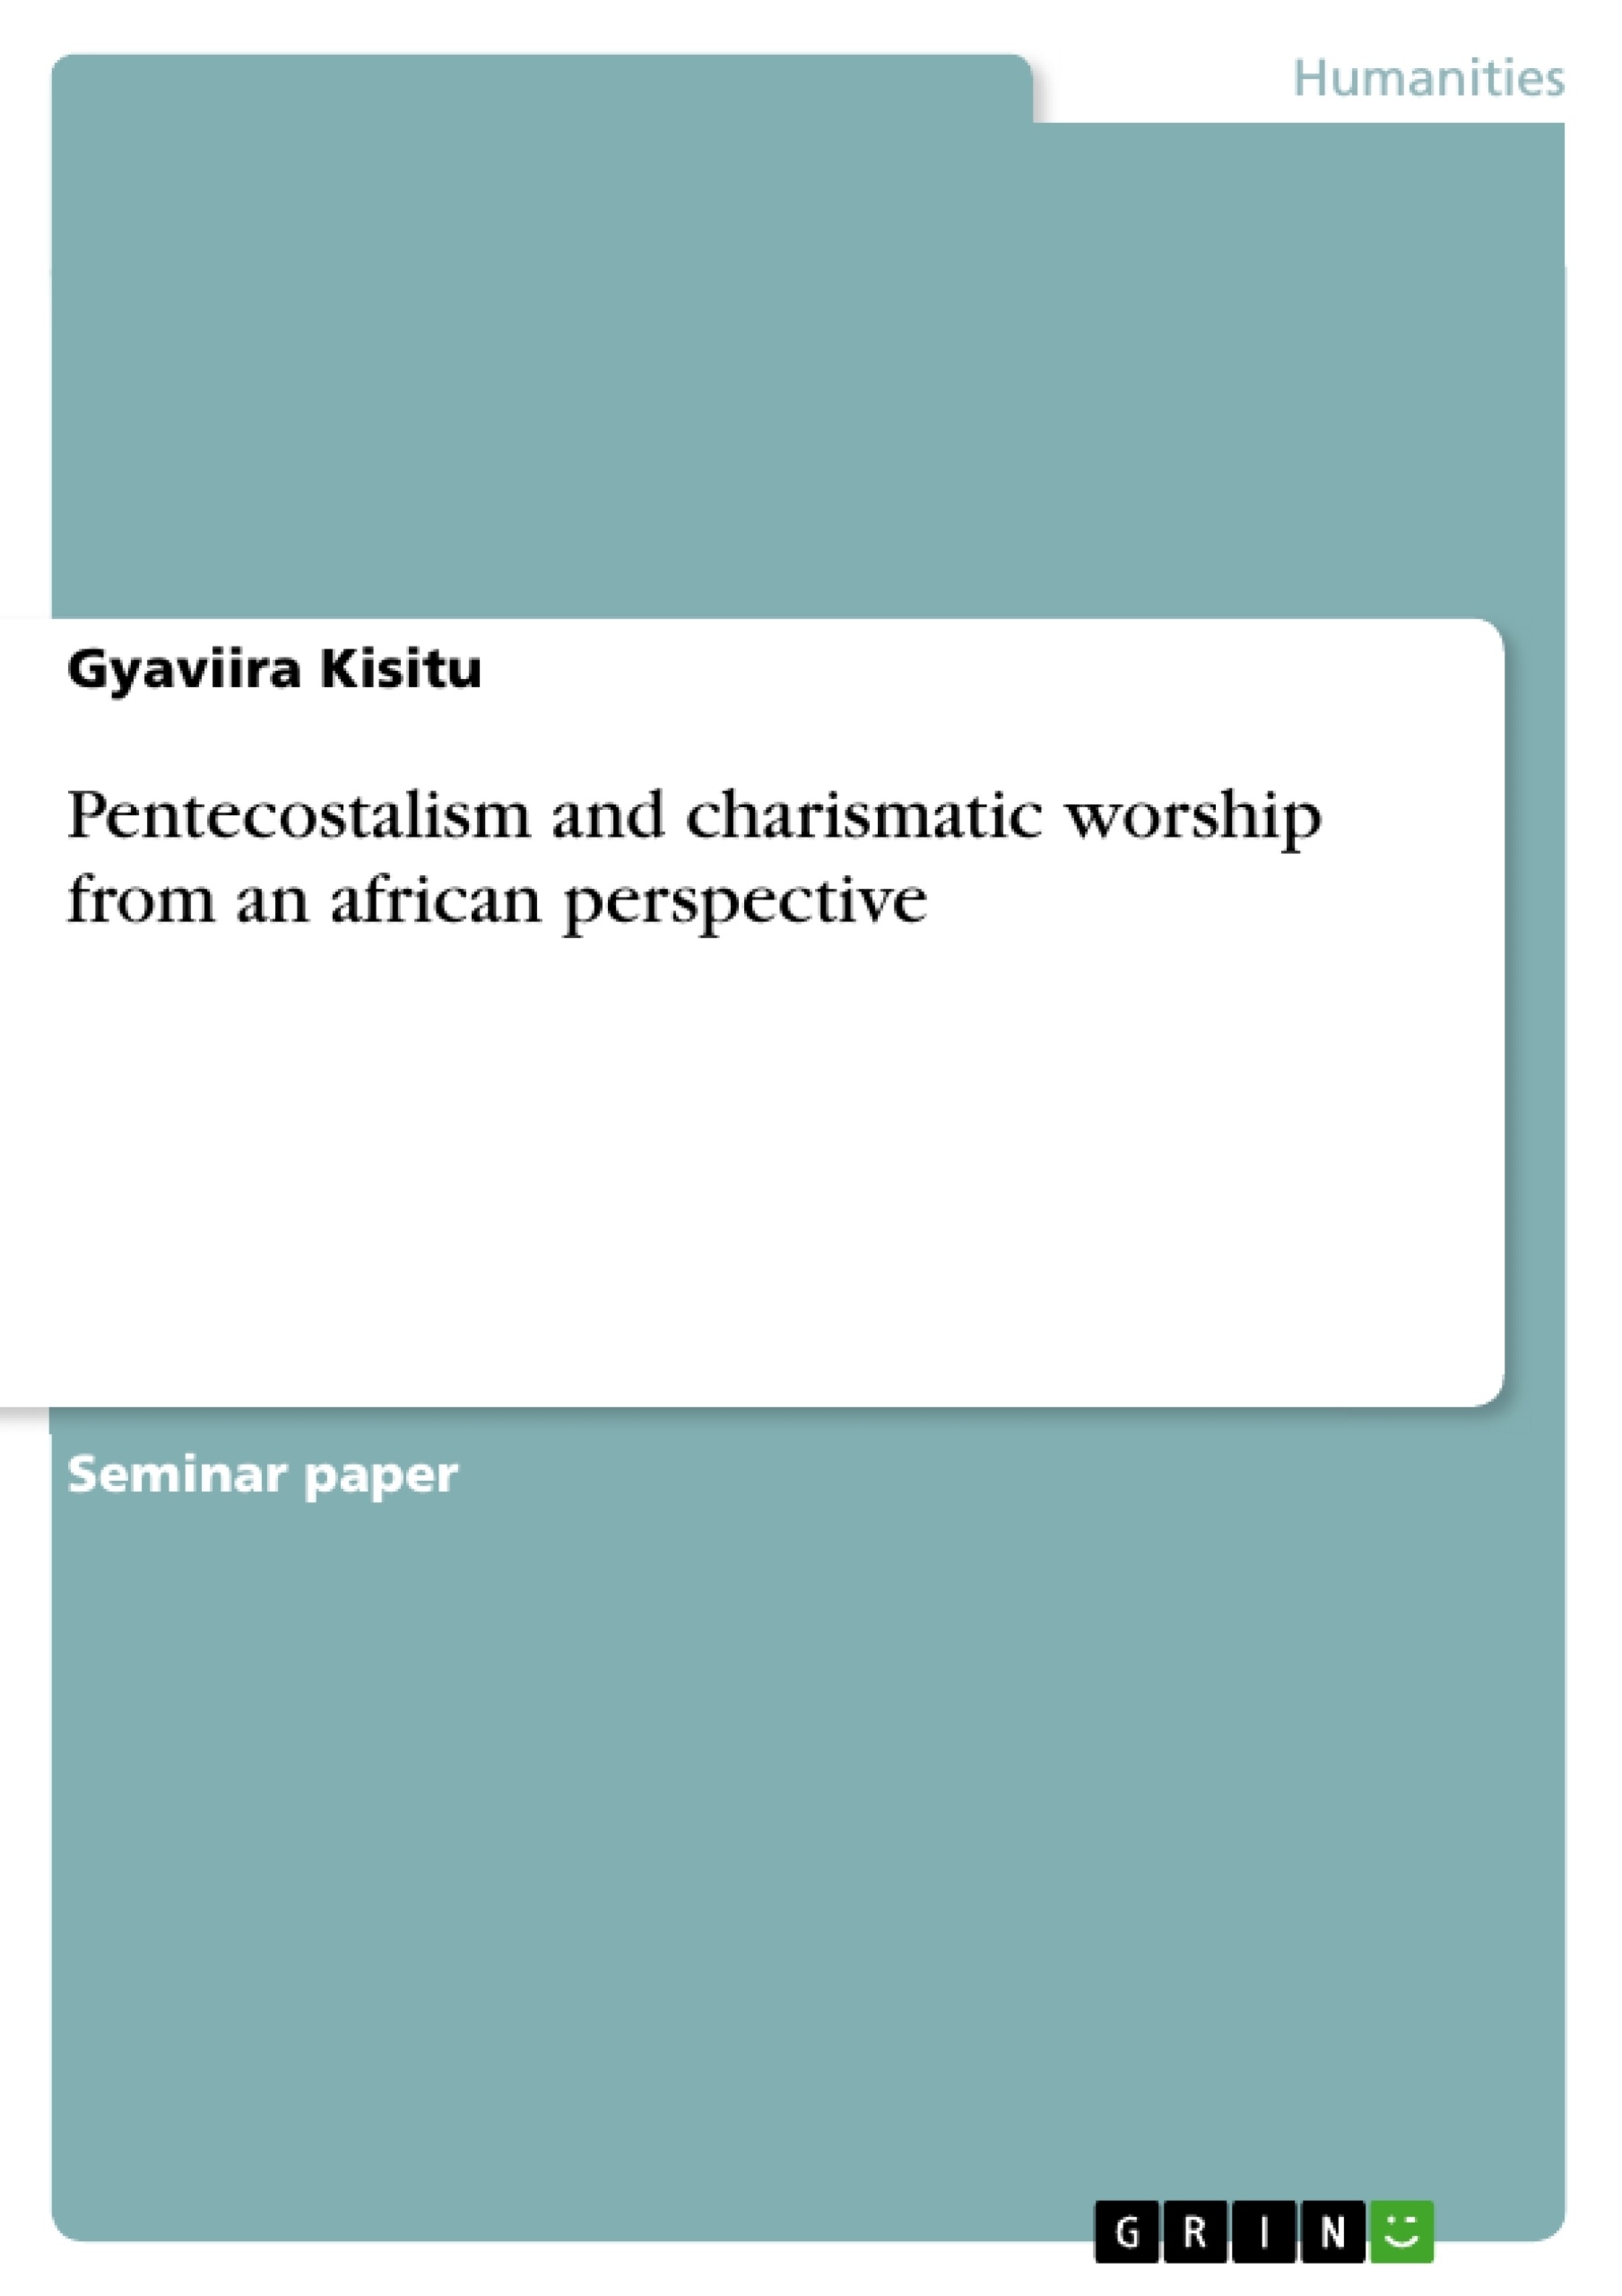 Title: Pentecostalism and charismatic worship from an african perspective